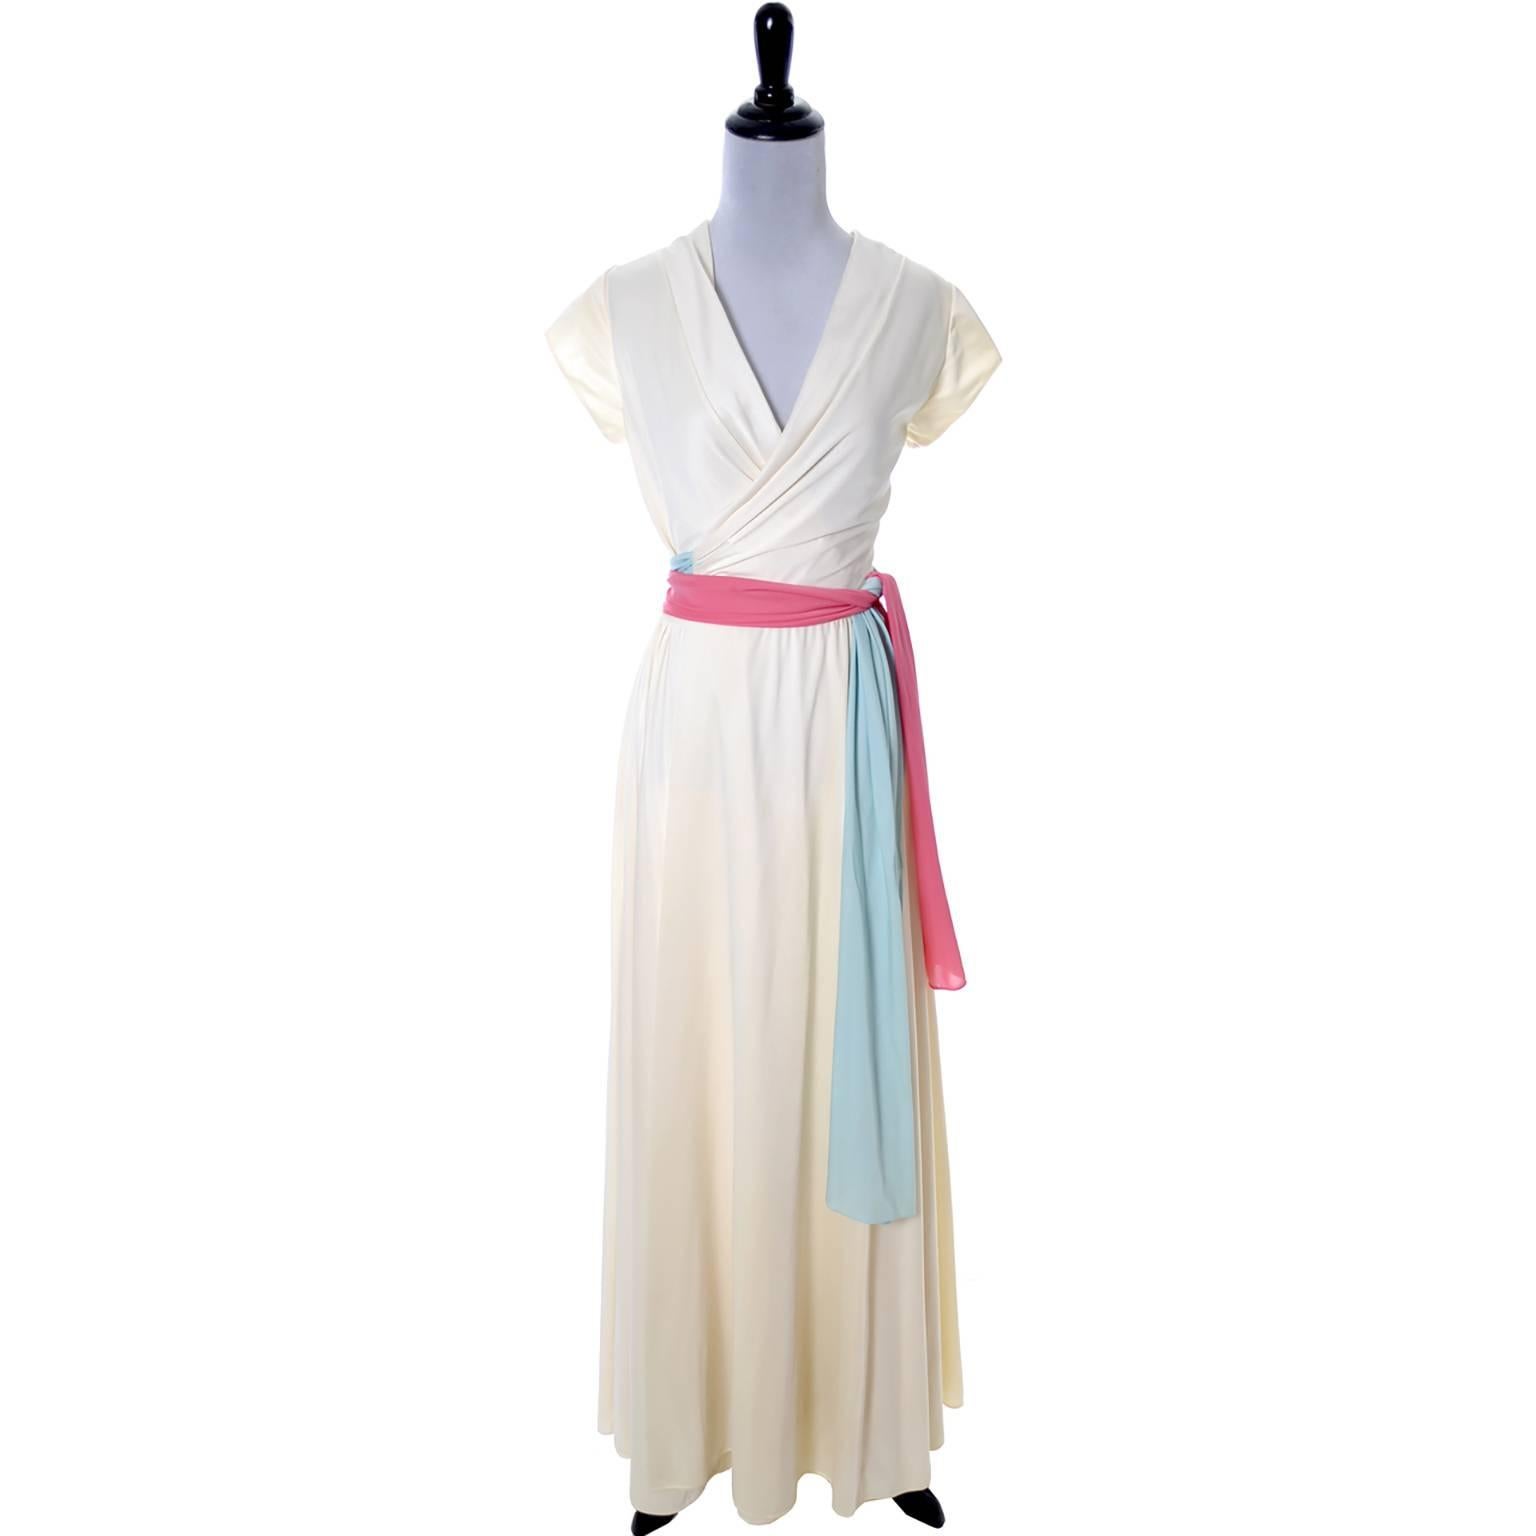 This is a lovely vintage late 1950's ivory hostess gown from Lucie Ann of Beverly Hills. This luxurious full length wrap gown has pretty sashes in shades of pink and blue and could easily be worn as an evening gown because of the weight of the